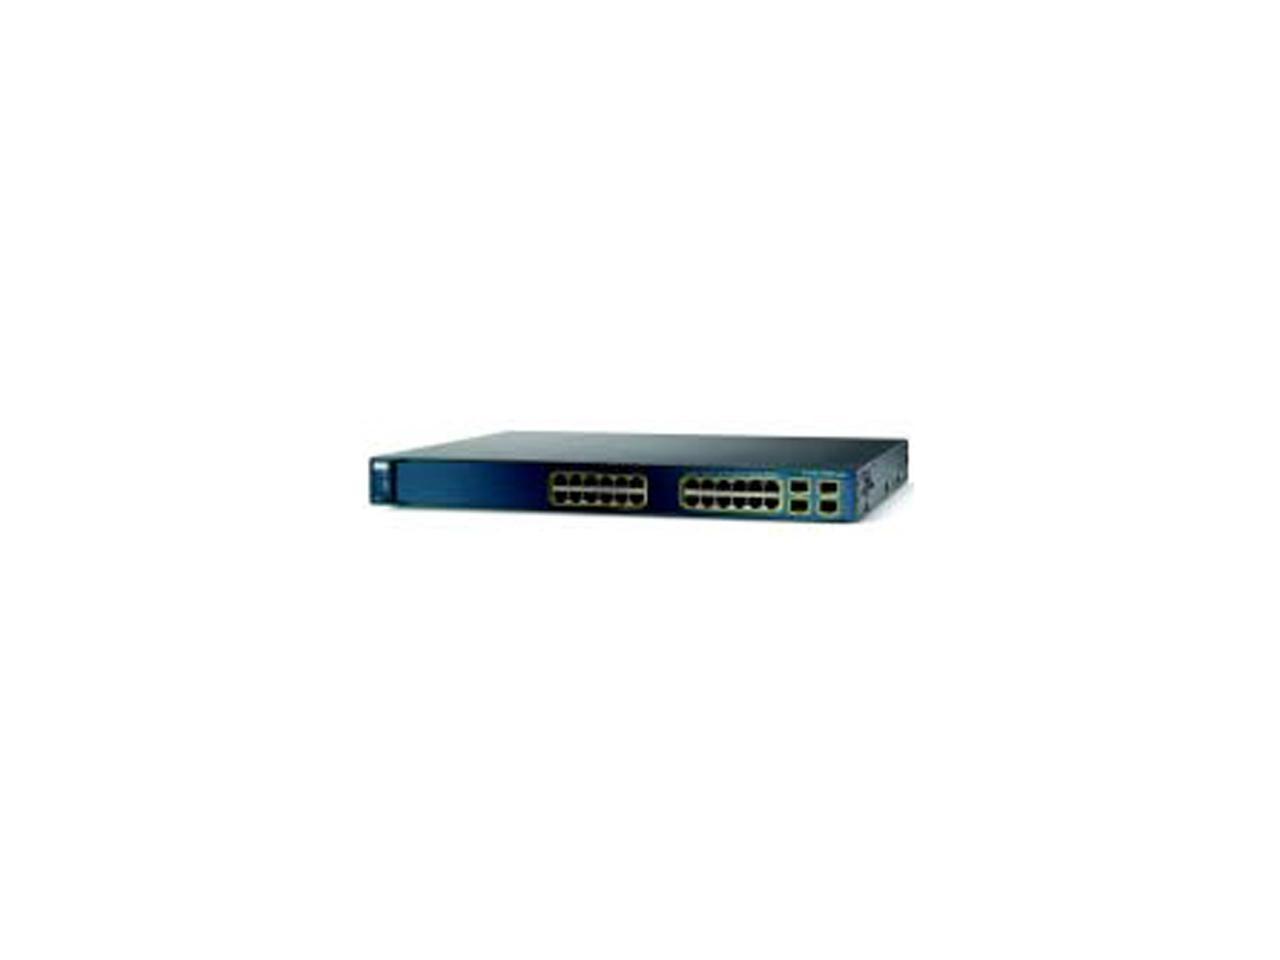 CISCO CATALYST 3560 WS-C3560G-24TS-E 10/100/1000Mbps Switch 24 Ethernet 10/100/1000 ports and 4 SFP-based Gigabit Ethernet ports Up to 12,000 MAC Address Table 128 MB DRAM32 MB Flash memory Buffer Memory